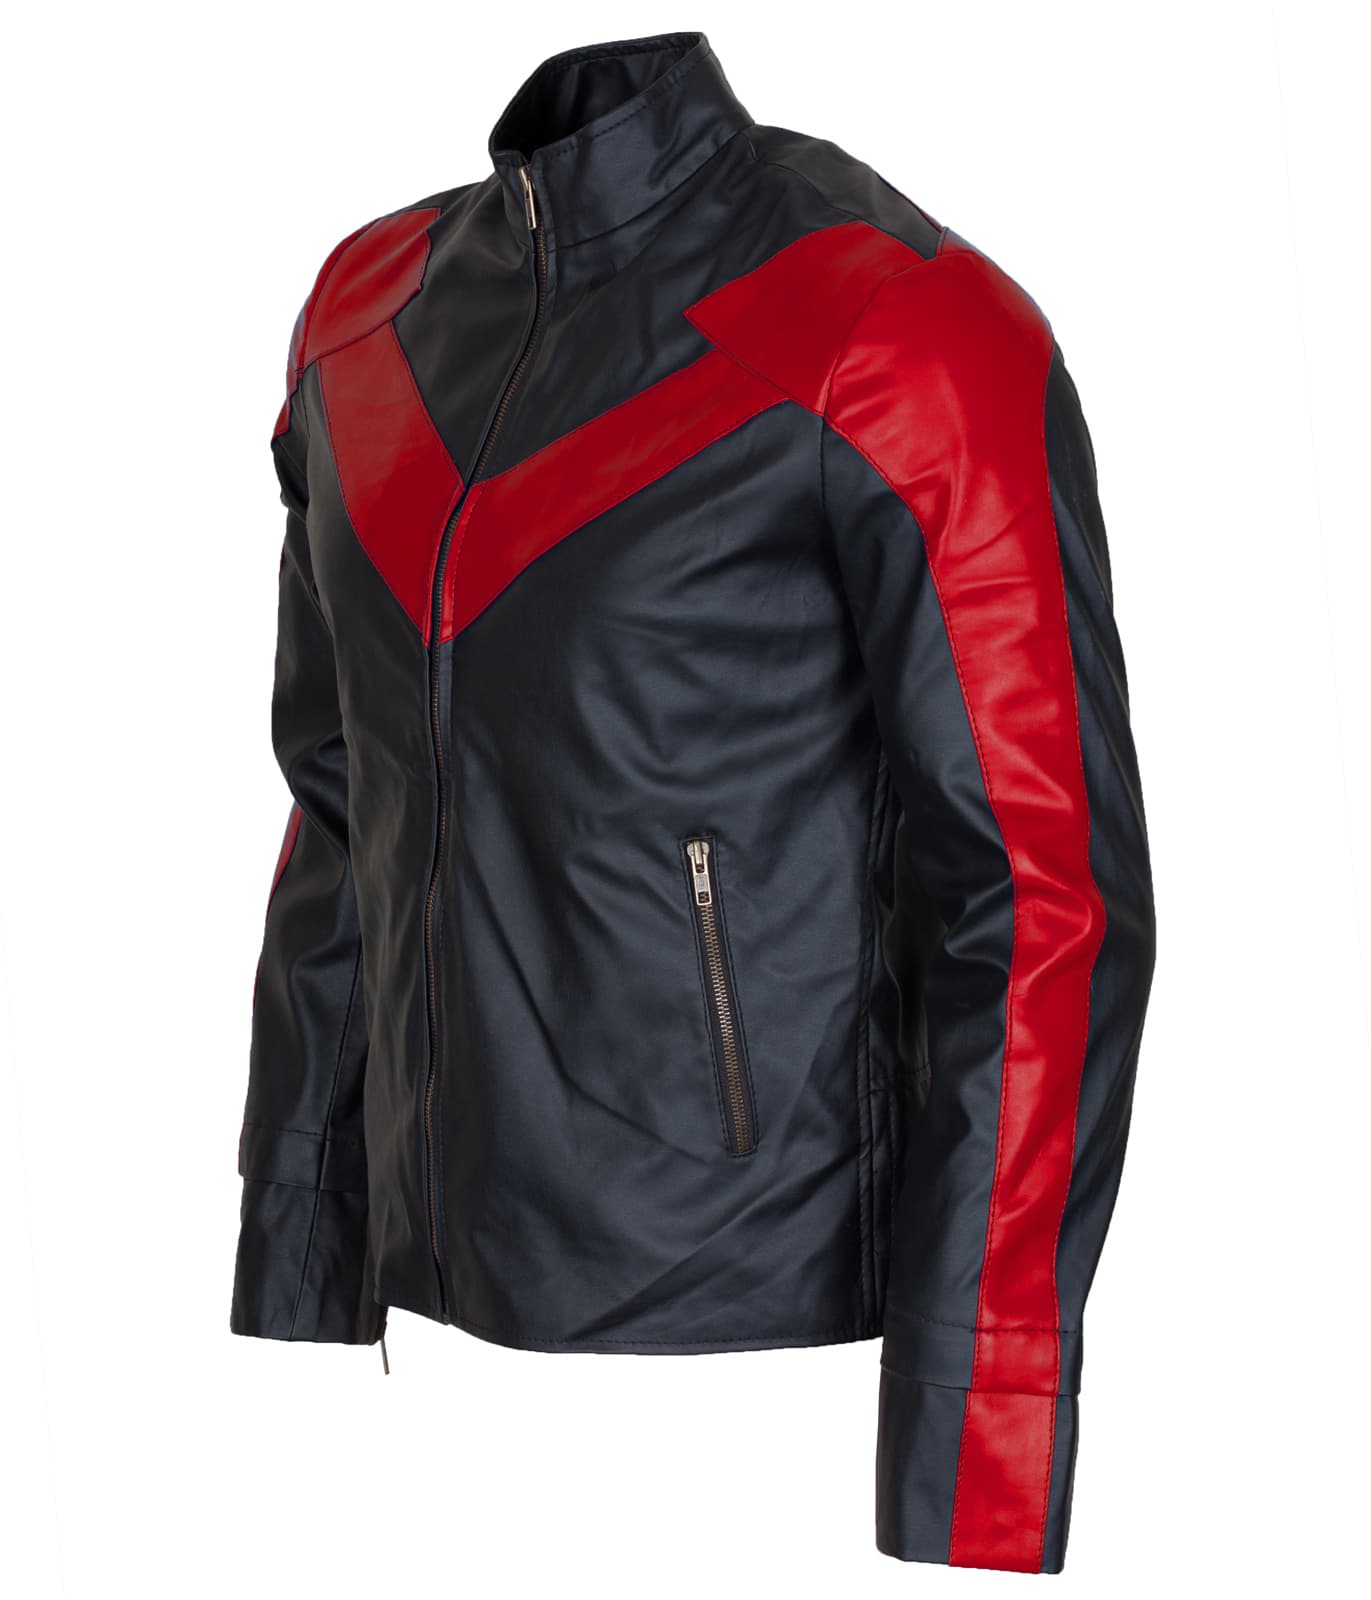 Nightwing-Faux-Leather-Jacket-Sale-USA